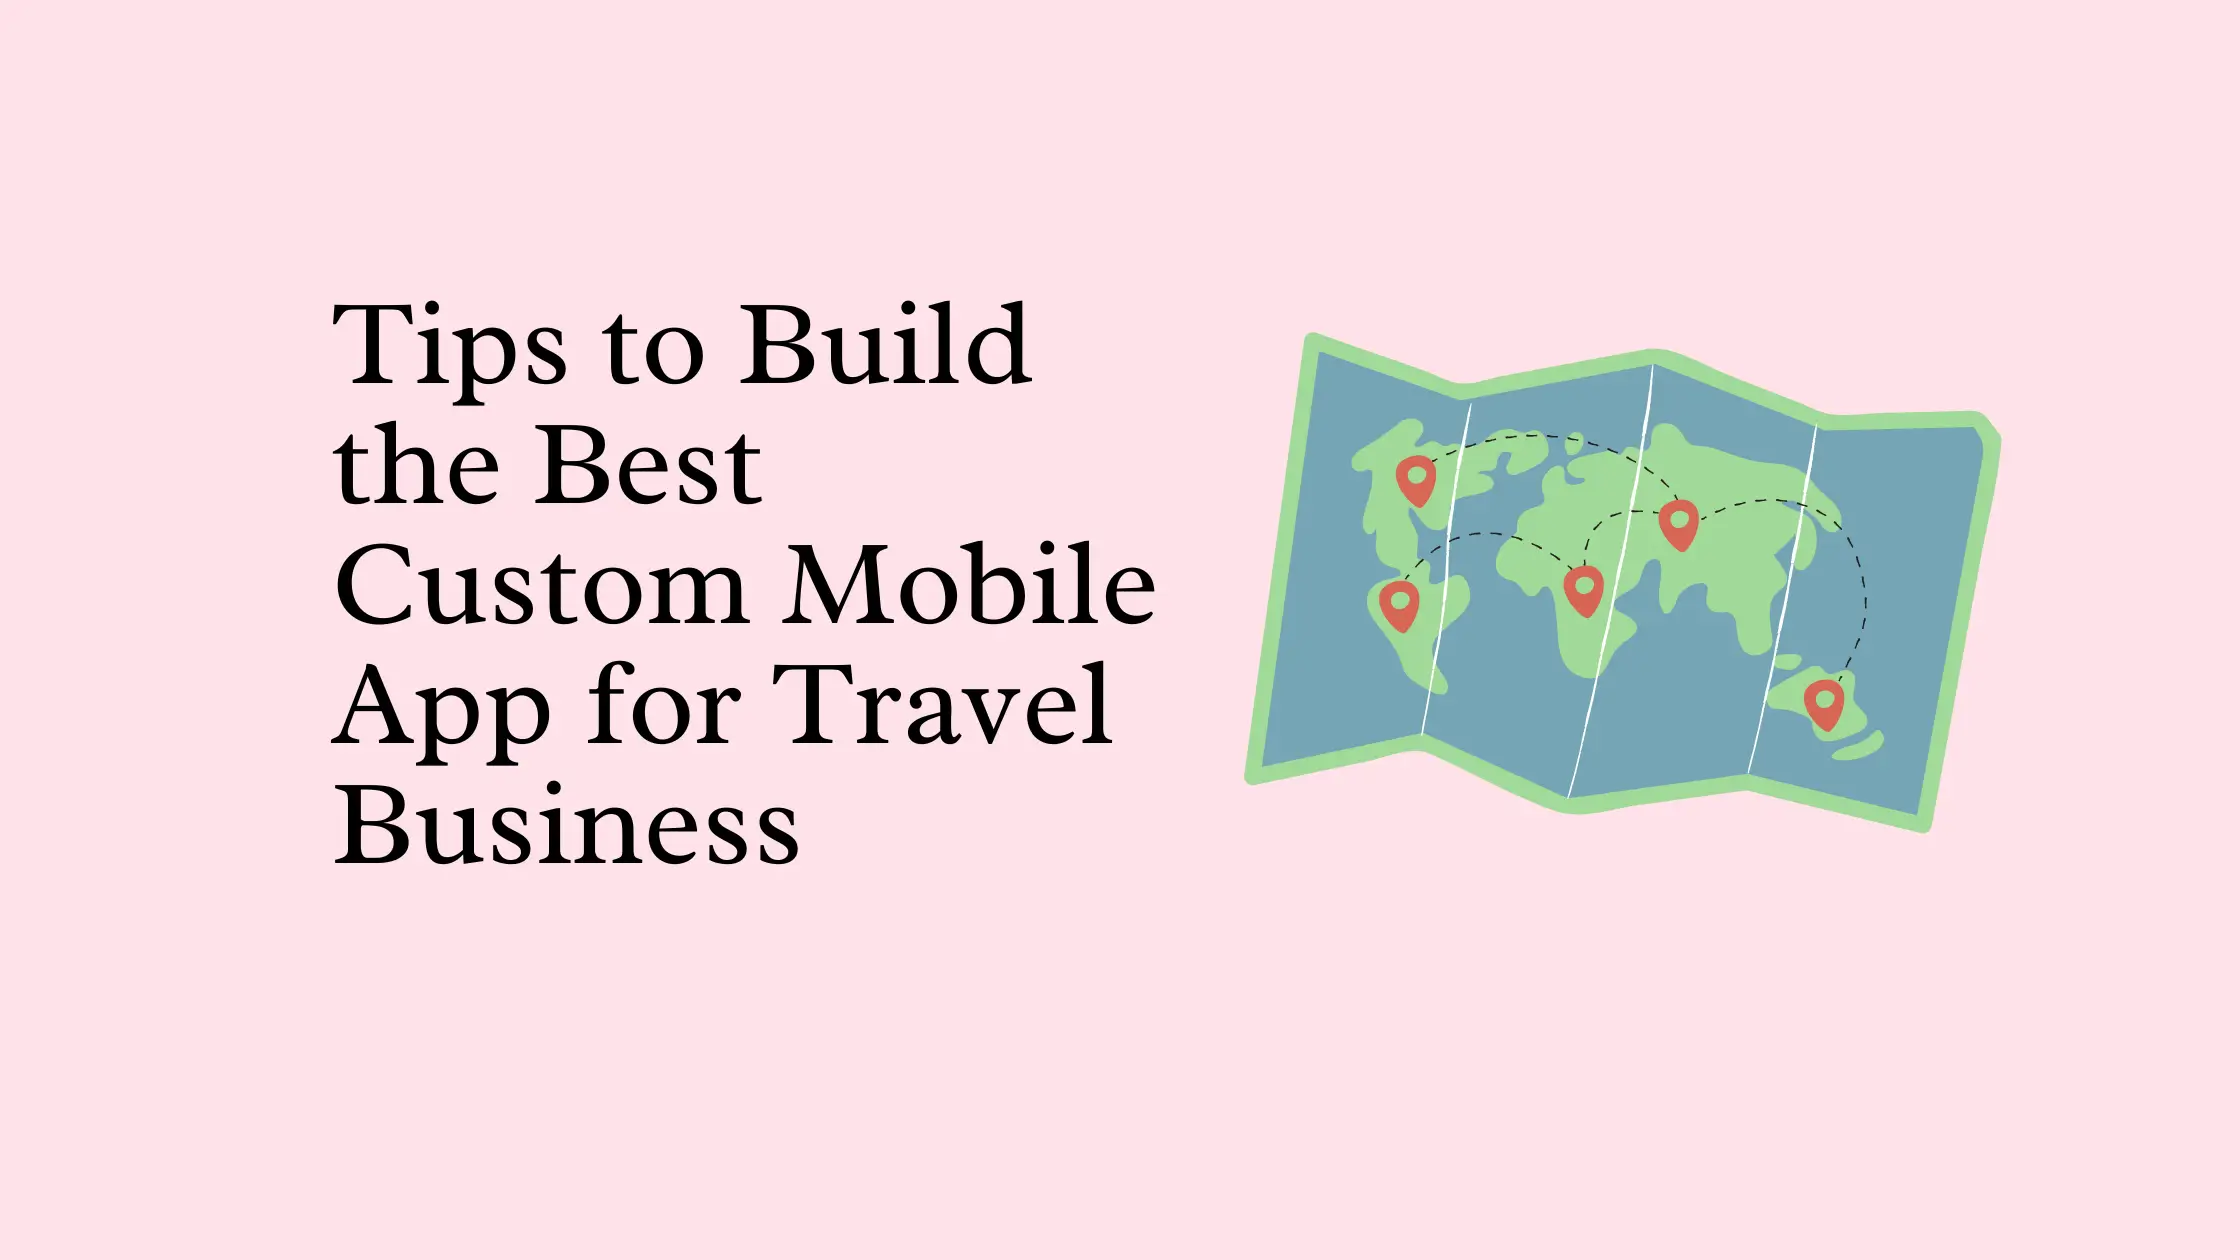 Tips-to-Build-the-Best-Custom-Mobile-App-for-Travel-Business